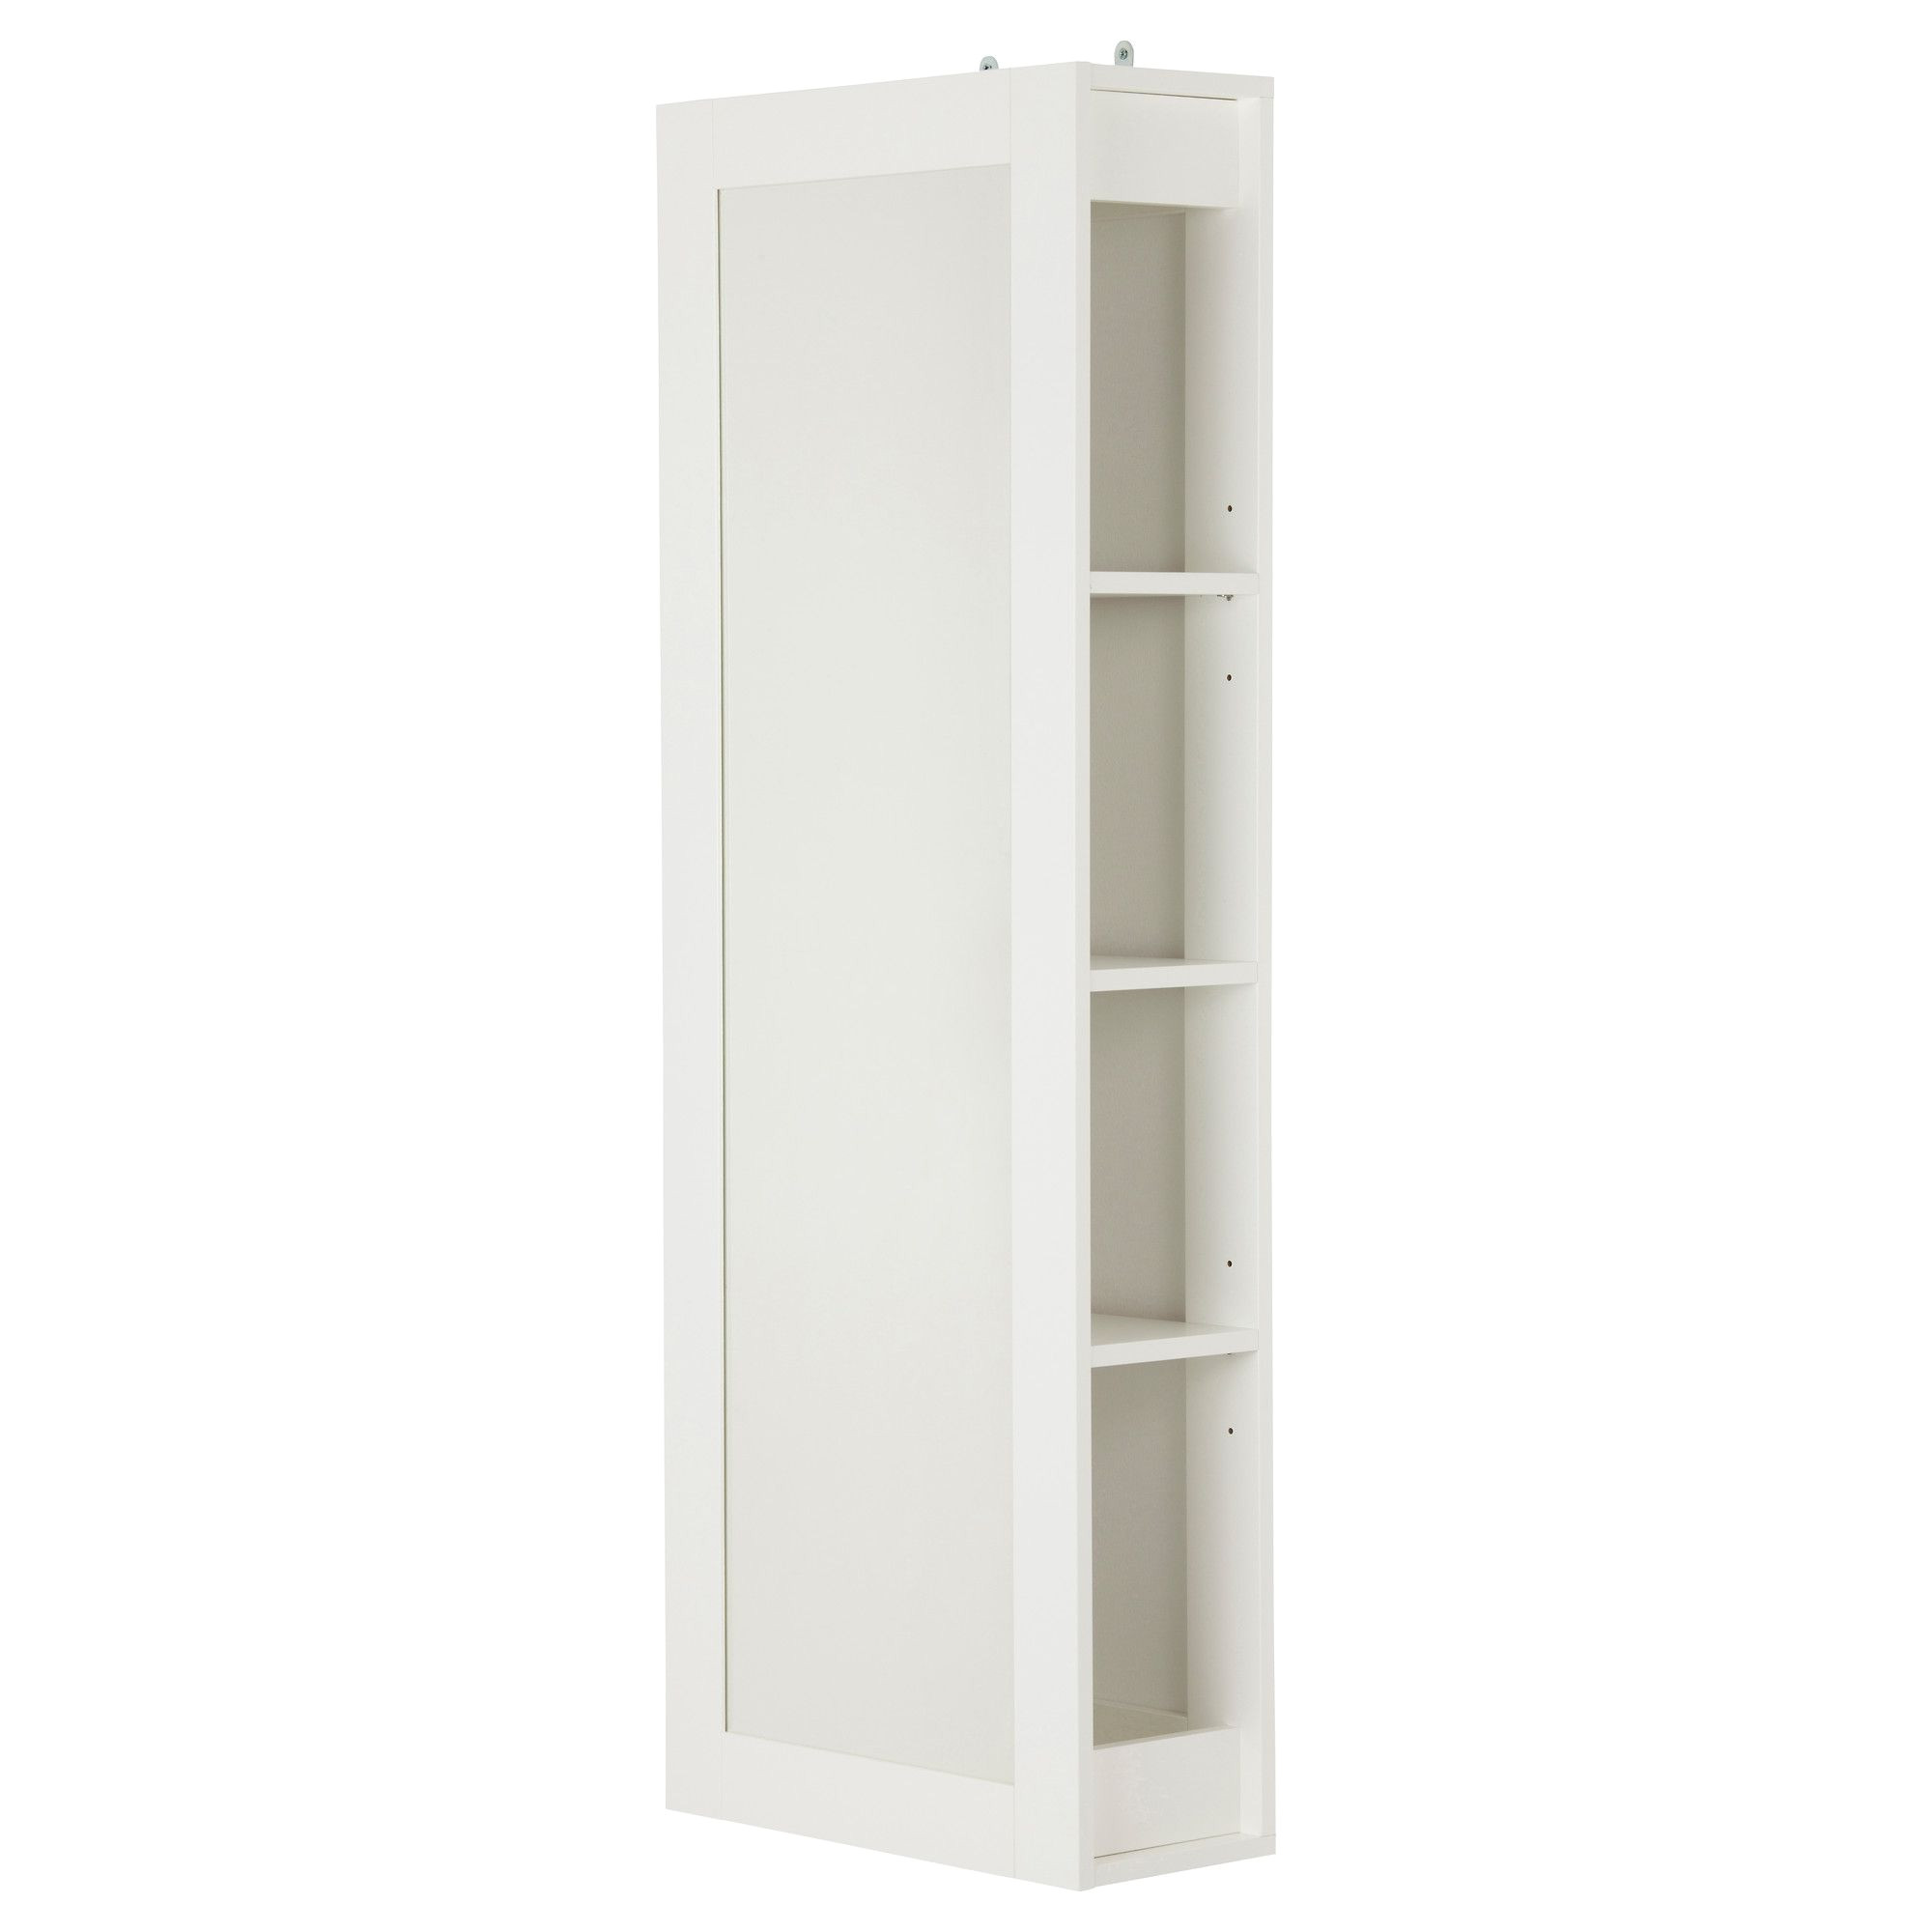 brimnes mirror with storage ikea would be great to stash things like lint rollers static guard etc behind the mirror so you can have them handy while